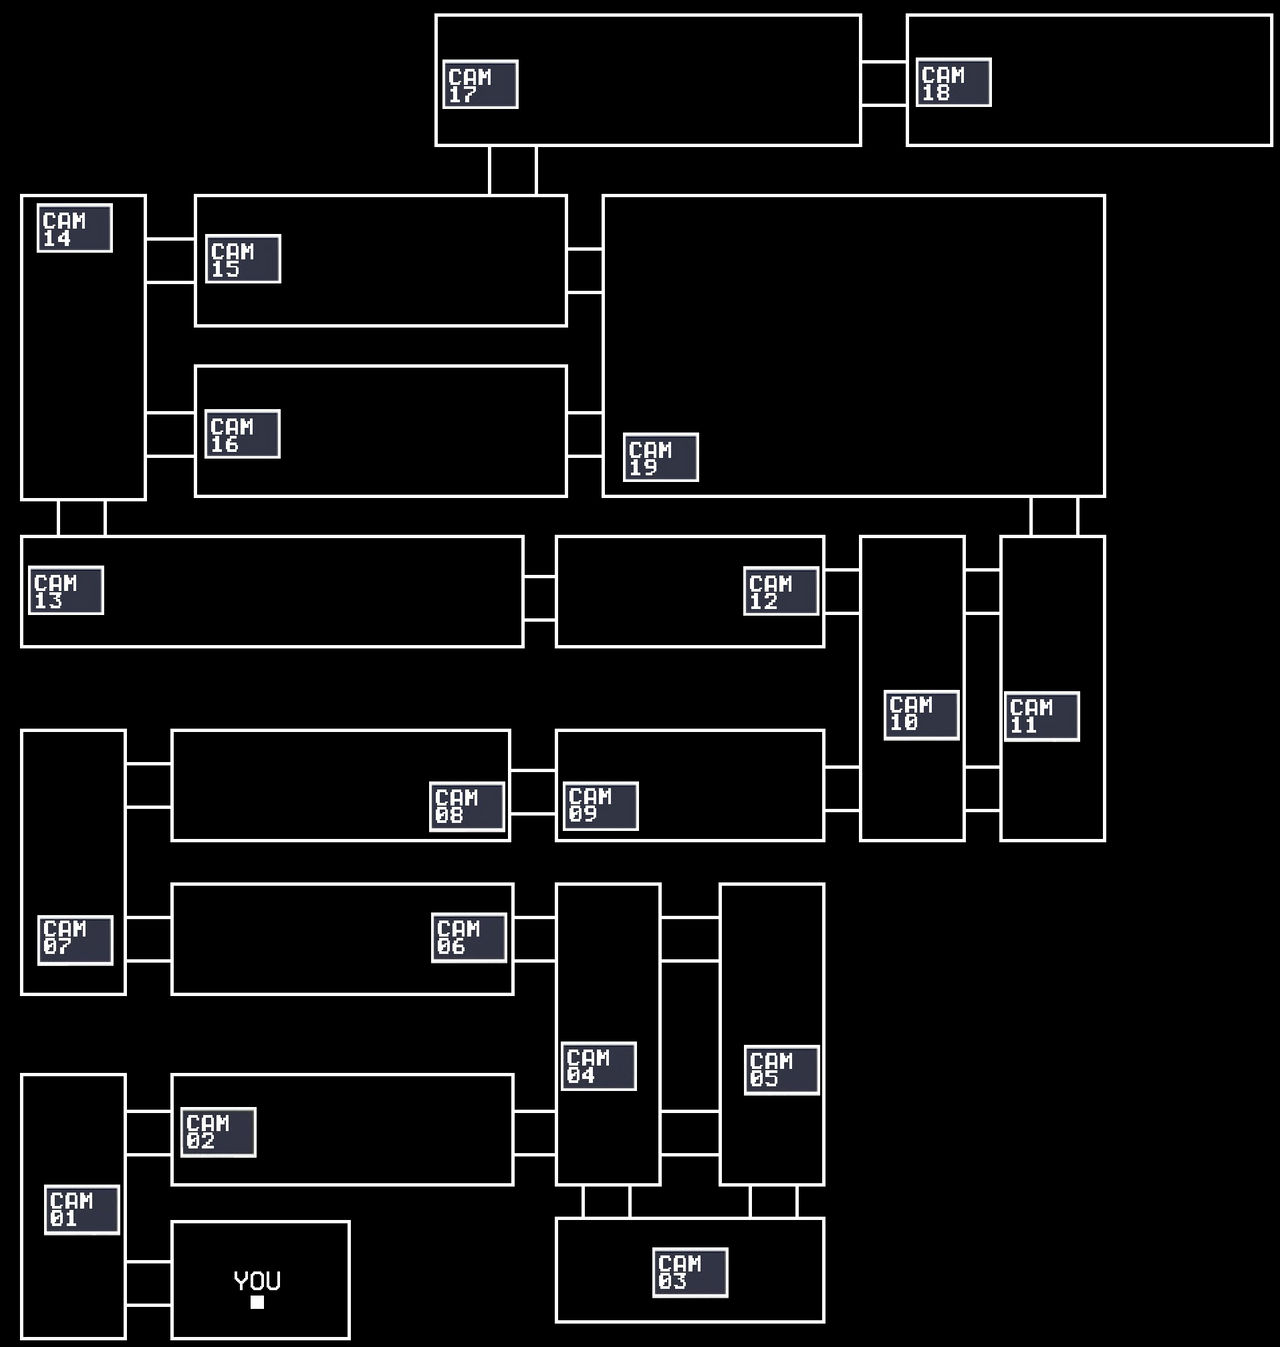 Five Nights At Freddy's 2 Cameras Maps by slendytubbies2d on DeviantArt